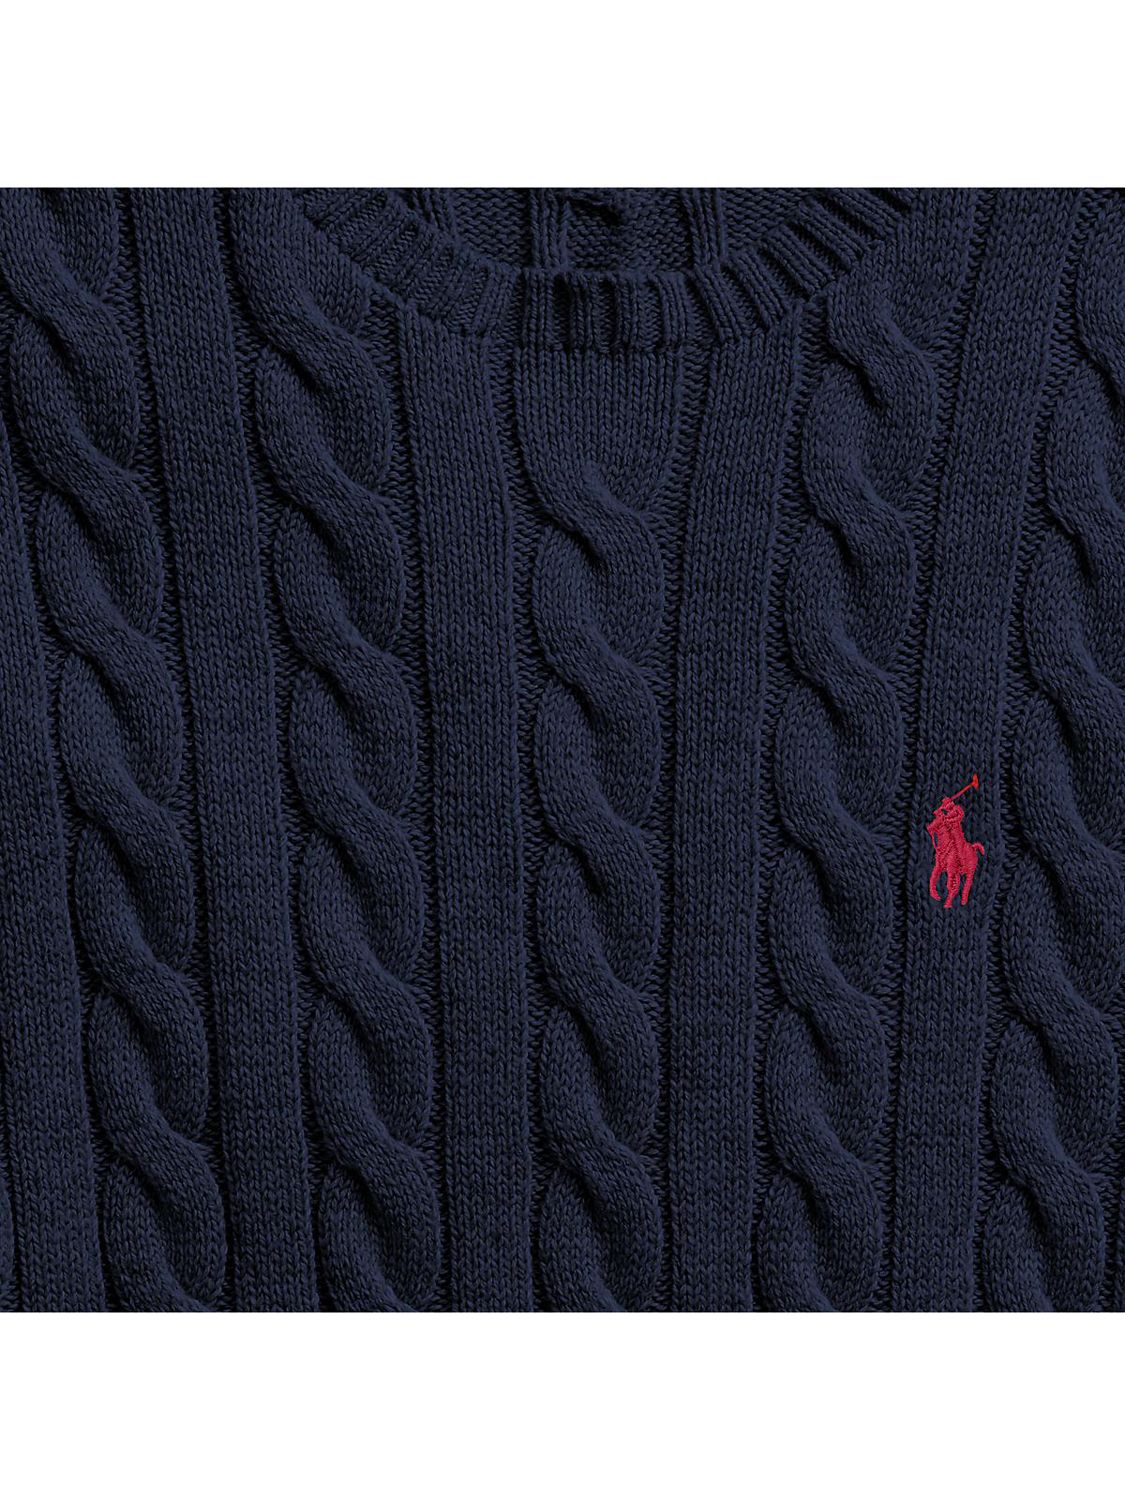 Polo Ralph Lauren Cotton Cable Knit Jumper, Hunter Navy at John Lewis ...